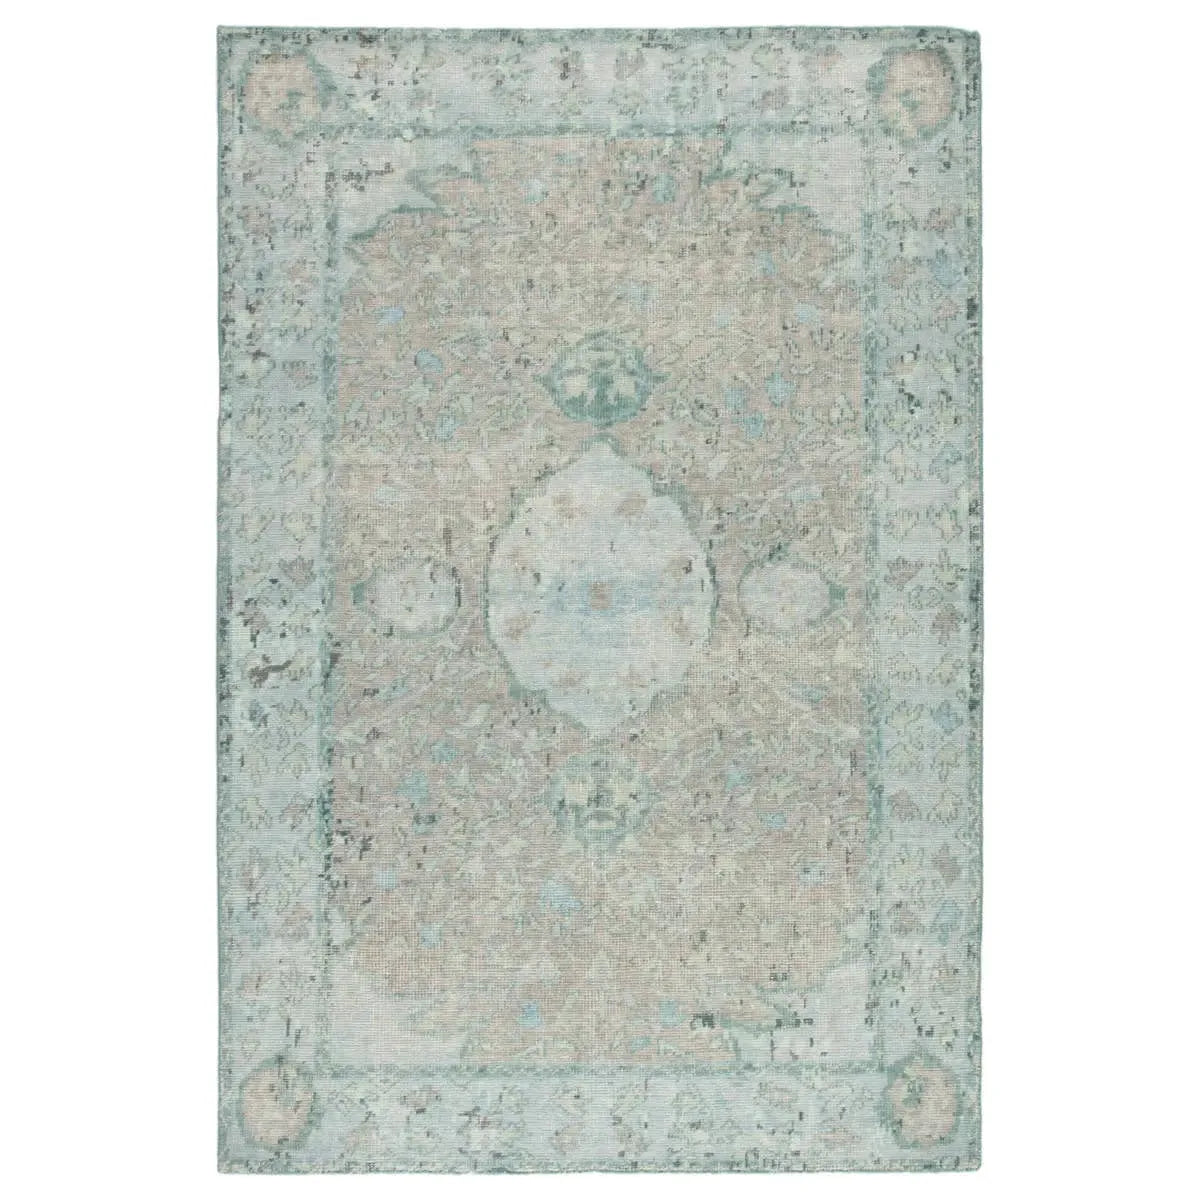 Exceptionally made and artfully designed, this hand-knotted area rug infuses contemporary homes with vintage allure. An on-trend colorway of vibrant aqua, beige, and dark gray lends a fresh update to the floral and medallion design, while a patina-rich antiqued effect creates a timeless look. Amethyst Home provides interior design services, furniture, rugs, and lighting in the Kansas City metro area.